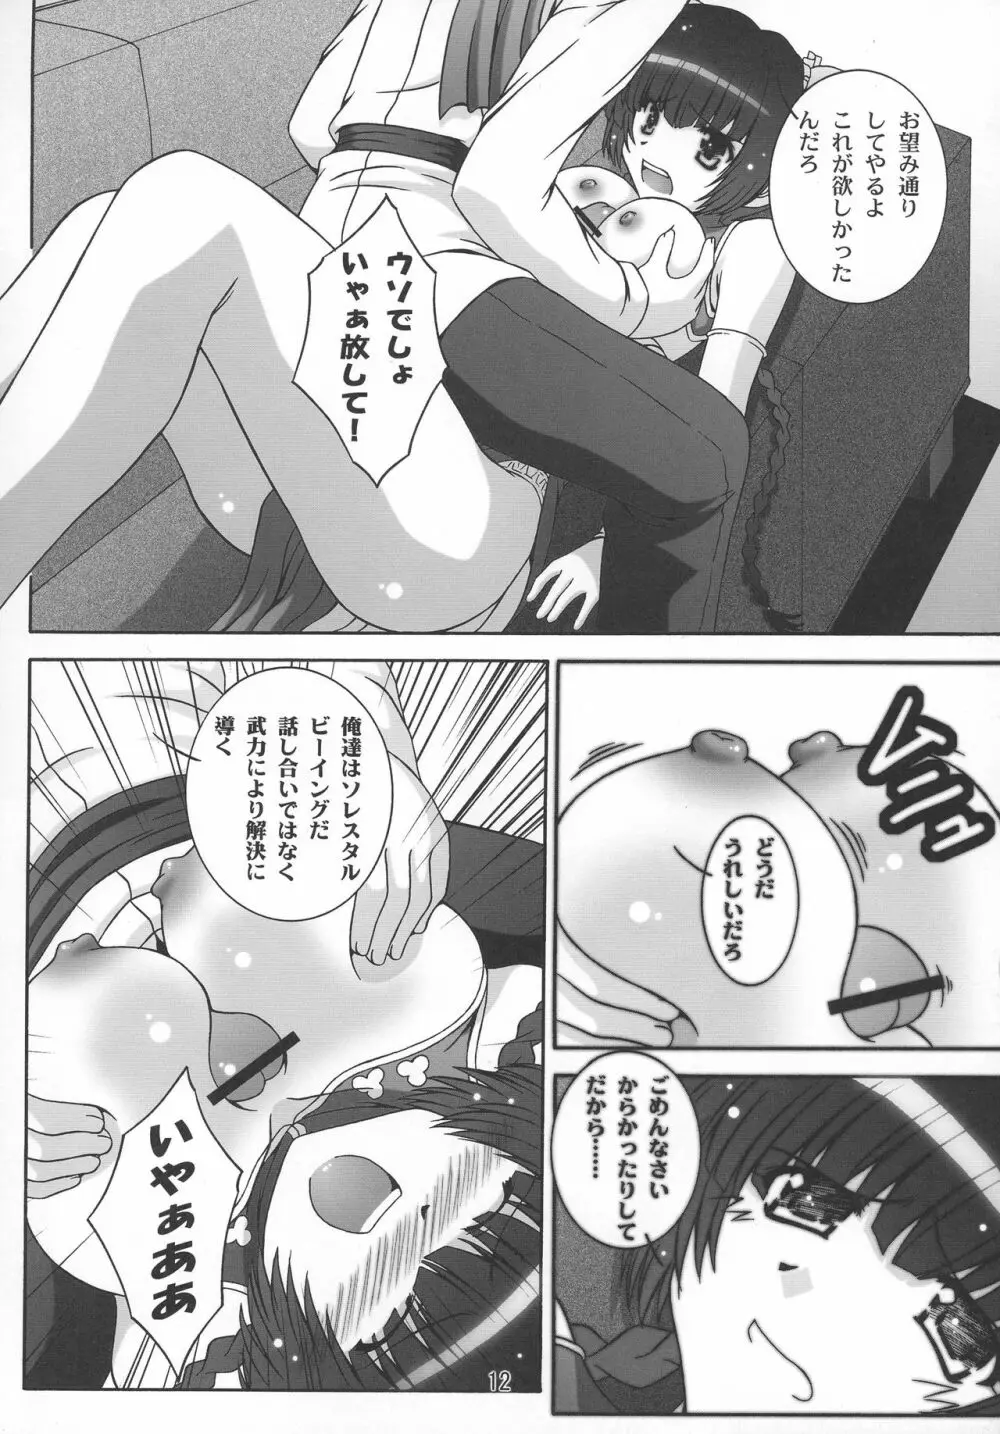 STAGE.7 王留美の歌声 - page11